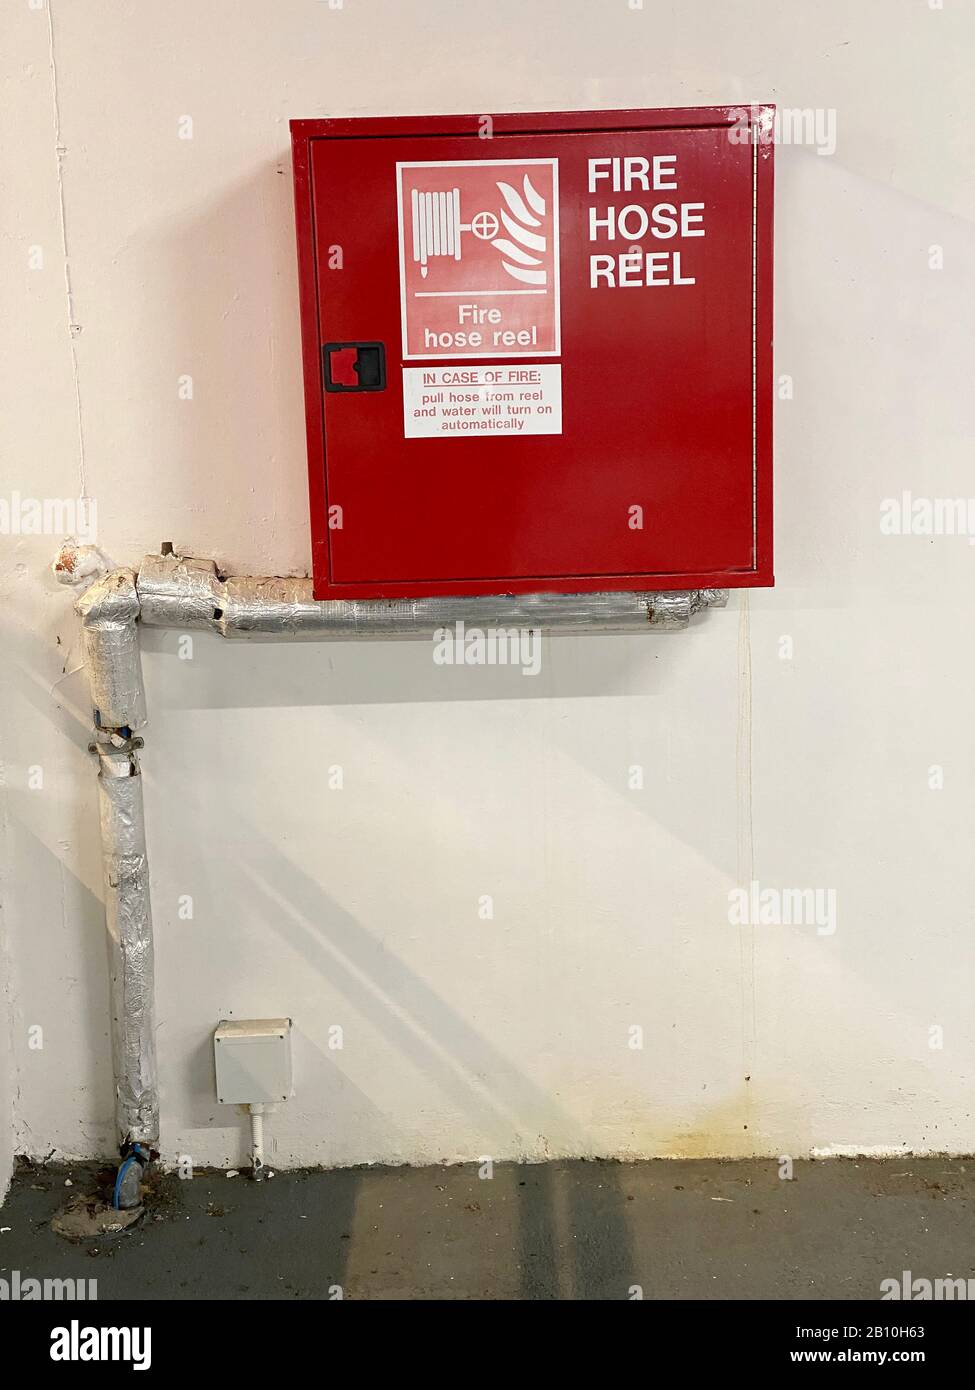 Fire hose reel red and insulated pipe outdoors in public work place Stock Photo